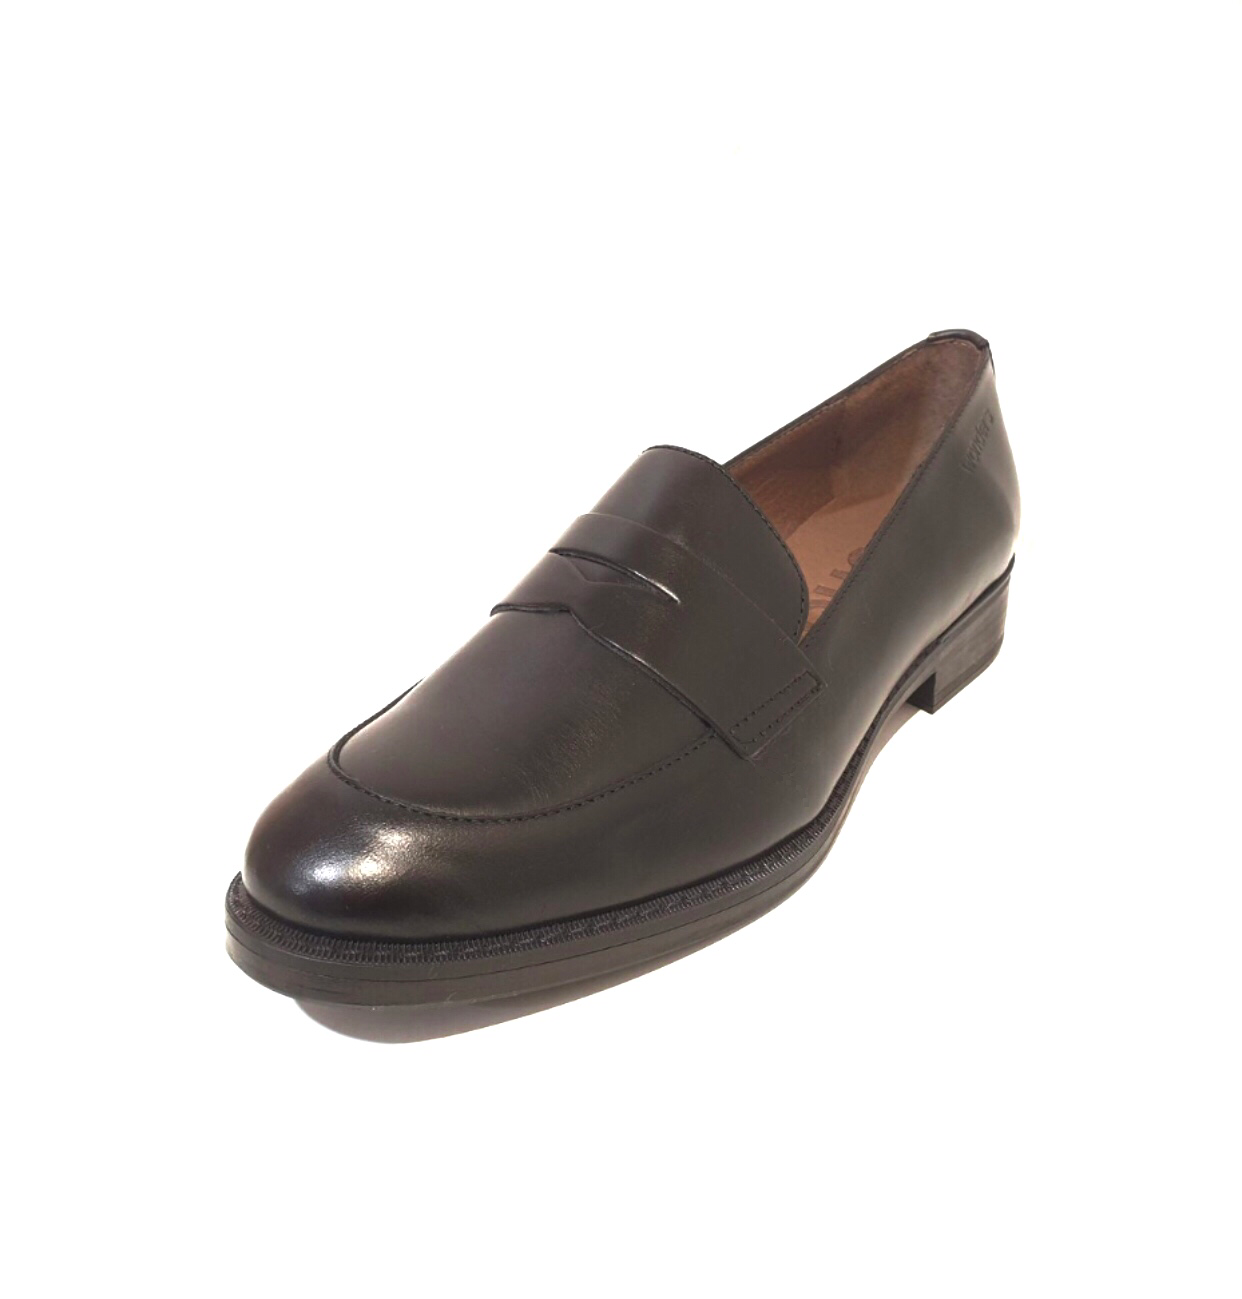 Wonders A-7251 Black Leather Loafer Made In Spain